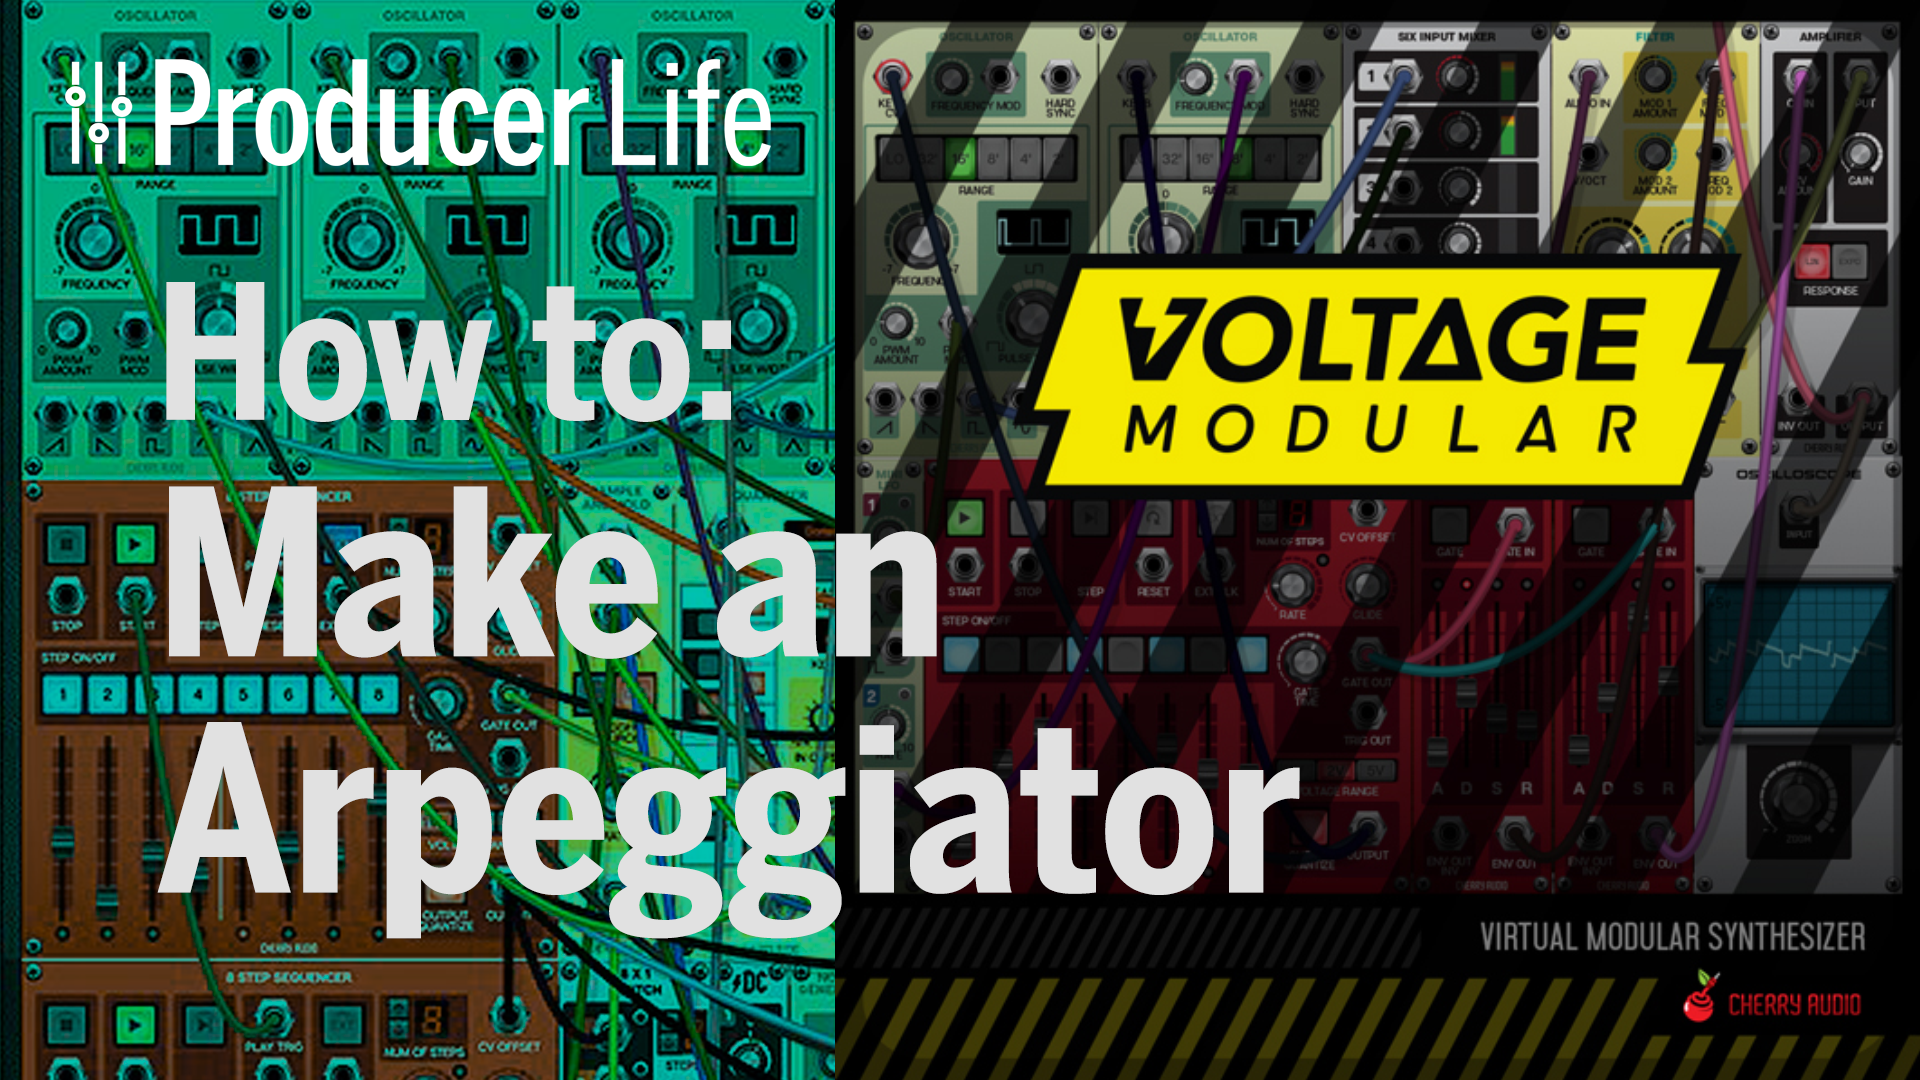 Click here to watch Voltage Modular video